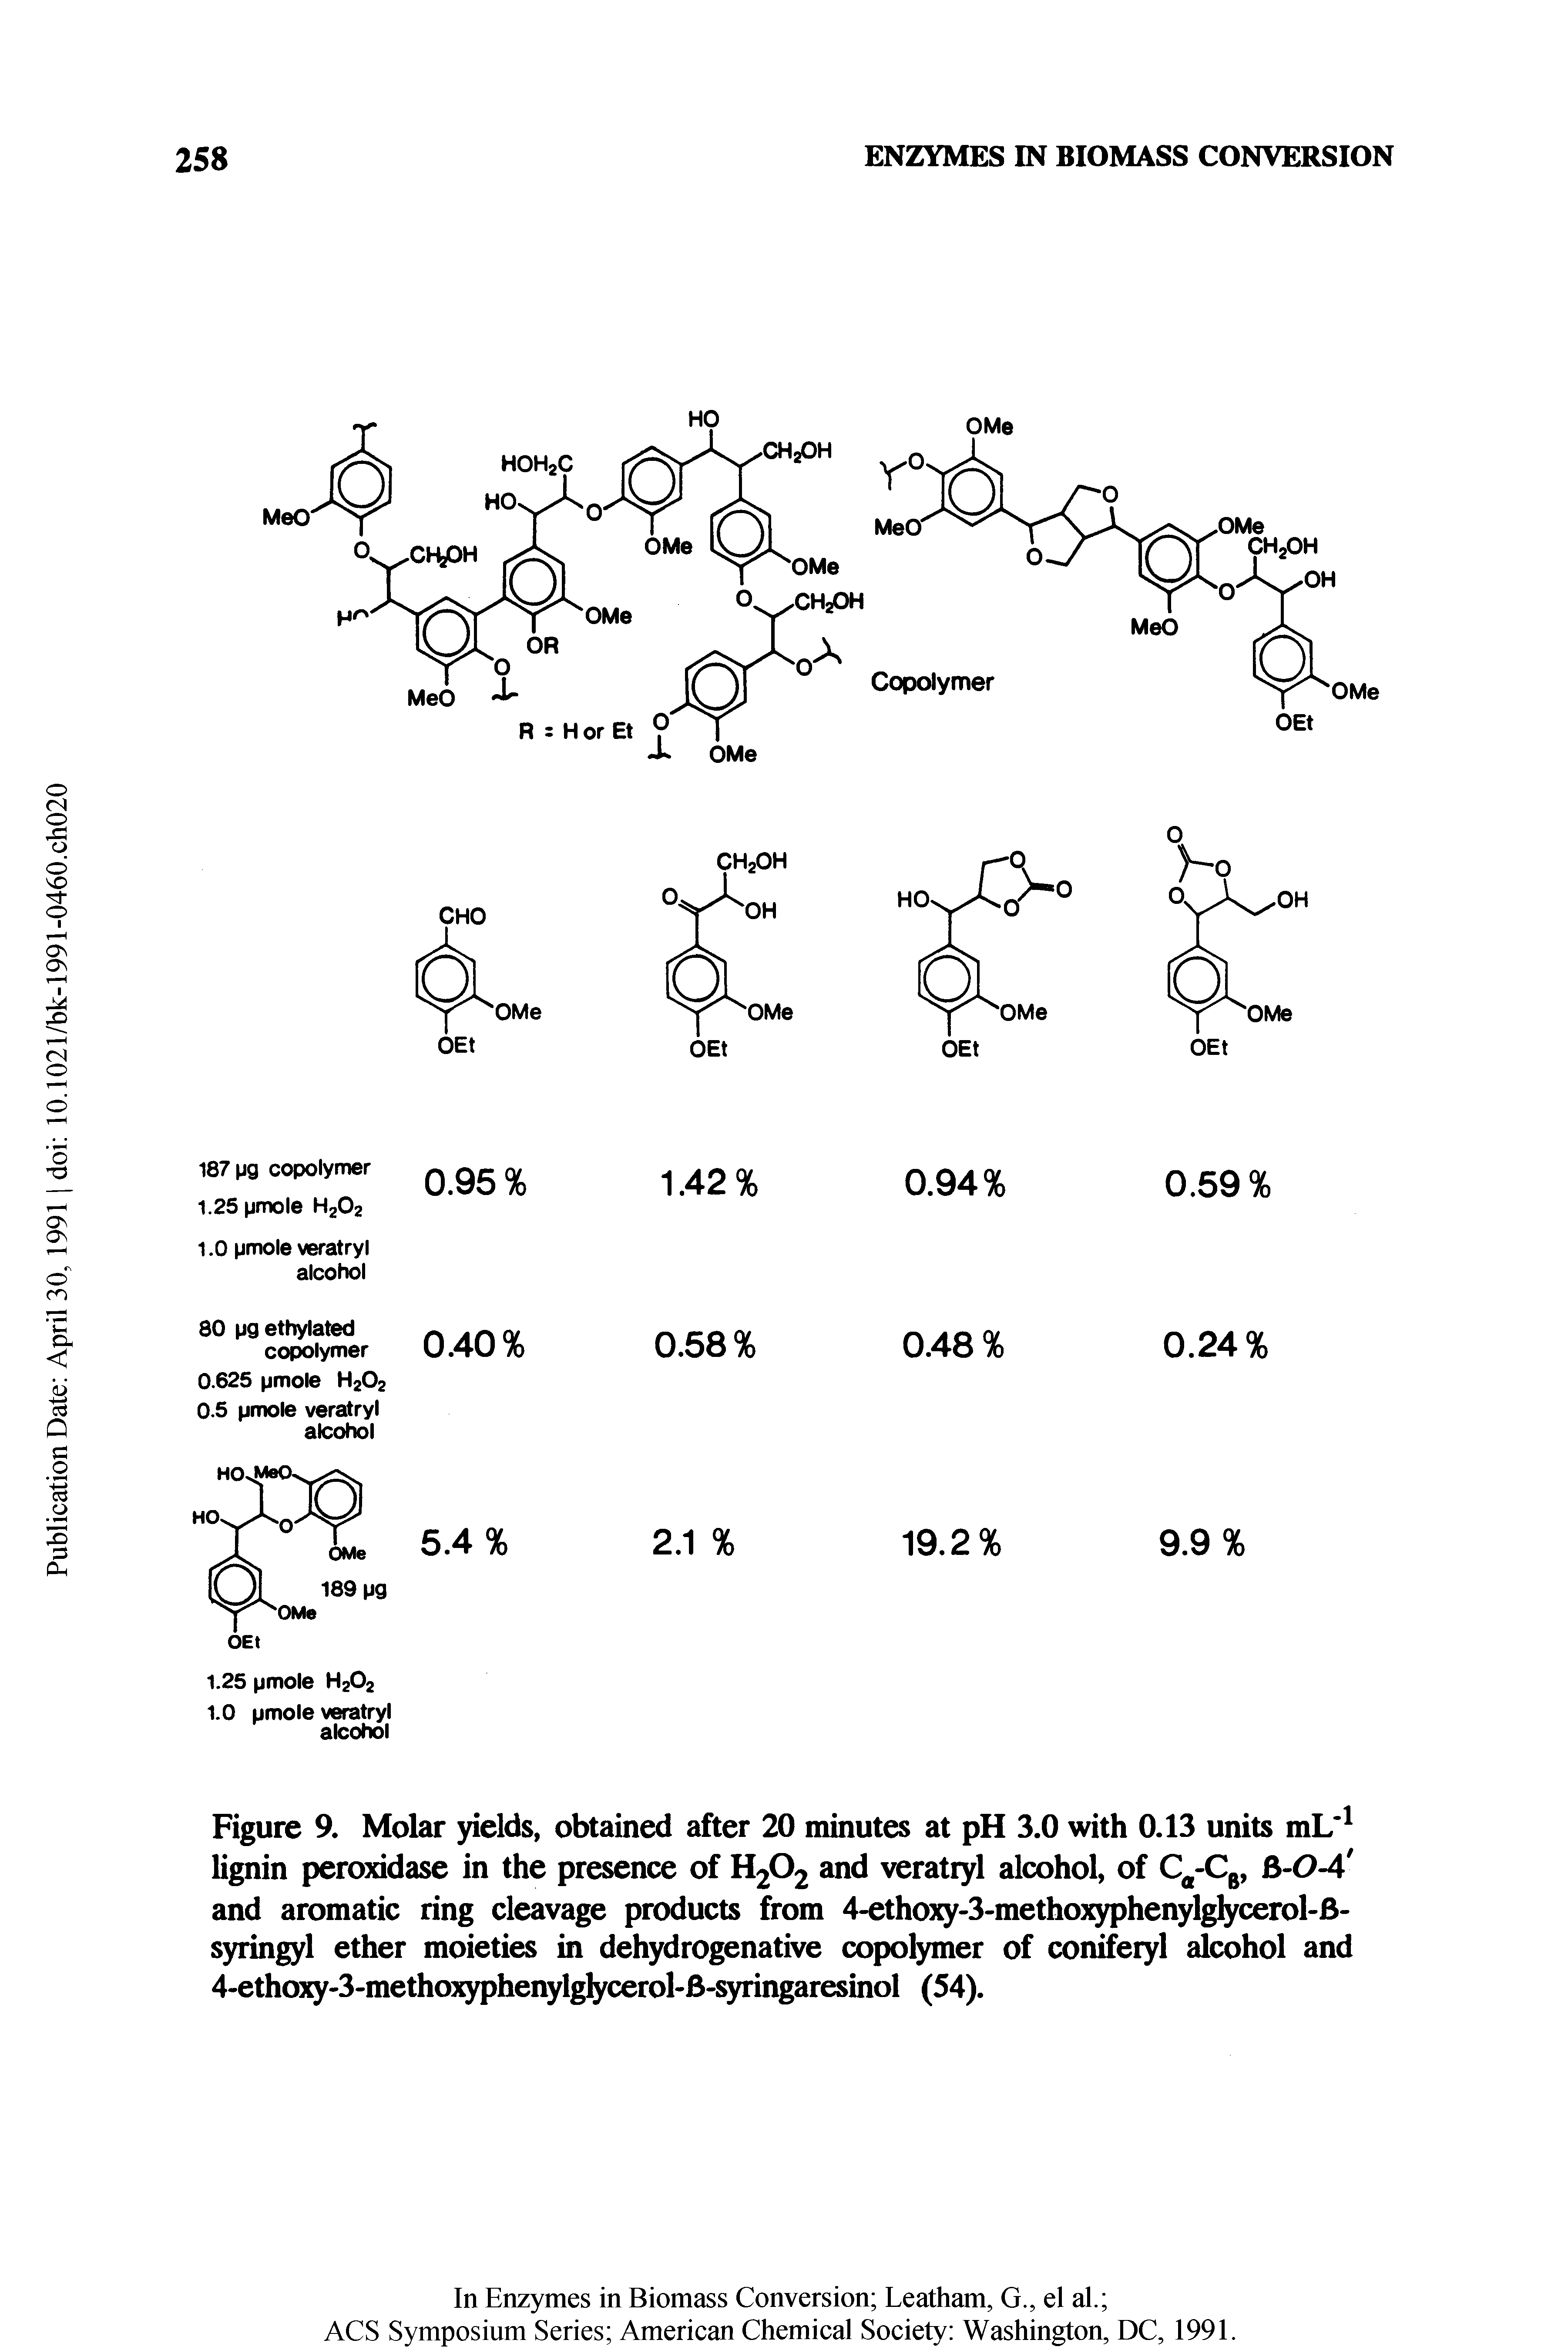 Figure 9. Molar yields, obtained after 20 minutes at pH 3.0 with 0.13 units mL lignin peroxidase in the presence of H2O2 and veratryl alcohol, of C -Cg, B-O-4 and aromatic ring cleavage products from 4.ethoxy-3-methoxyphenylgfycerol-B-syringyl ether moieties in dehydrogenative copolymer of conifery] alcohol and 4.ethoxy 3-methoryphet lgfycerol-B-syringaresinol (54).